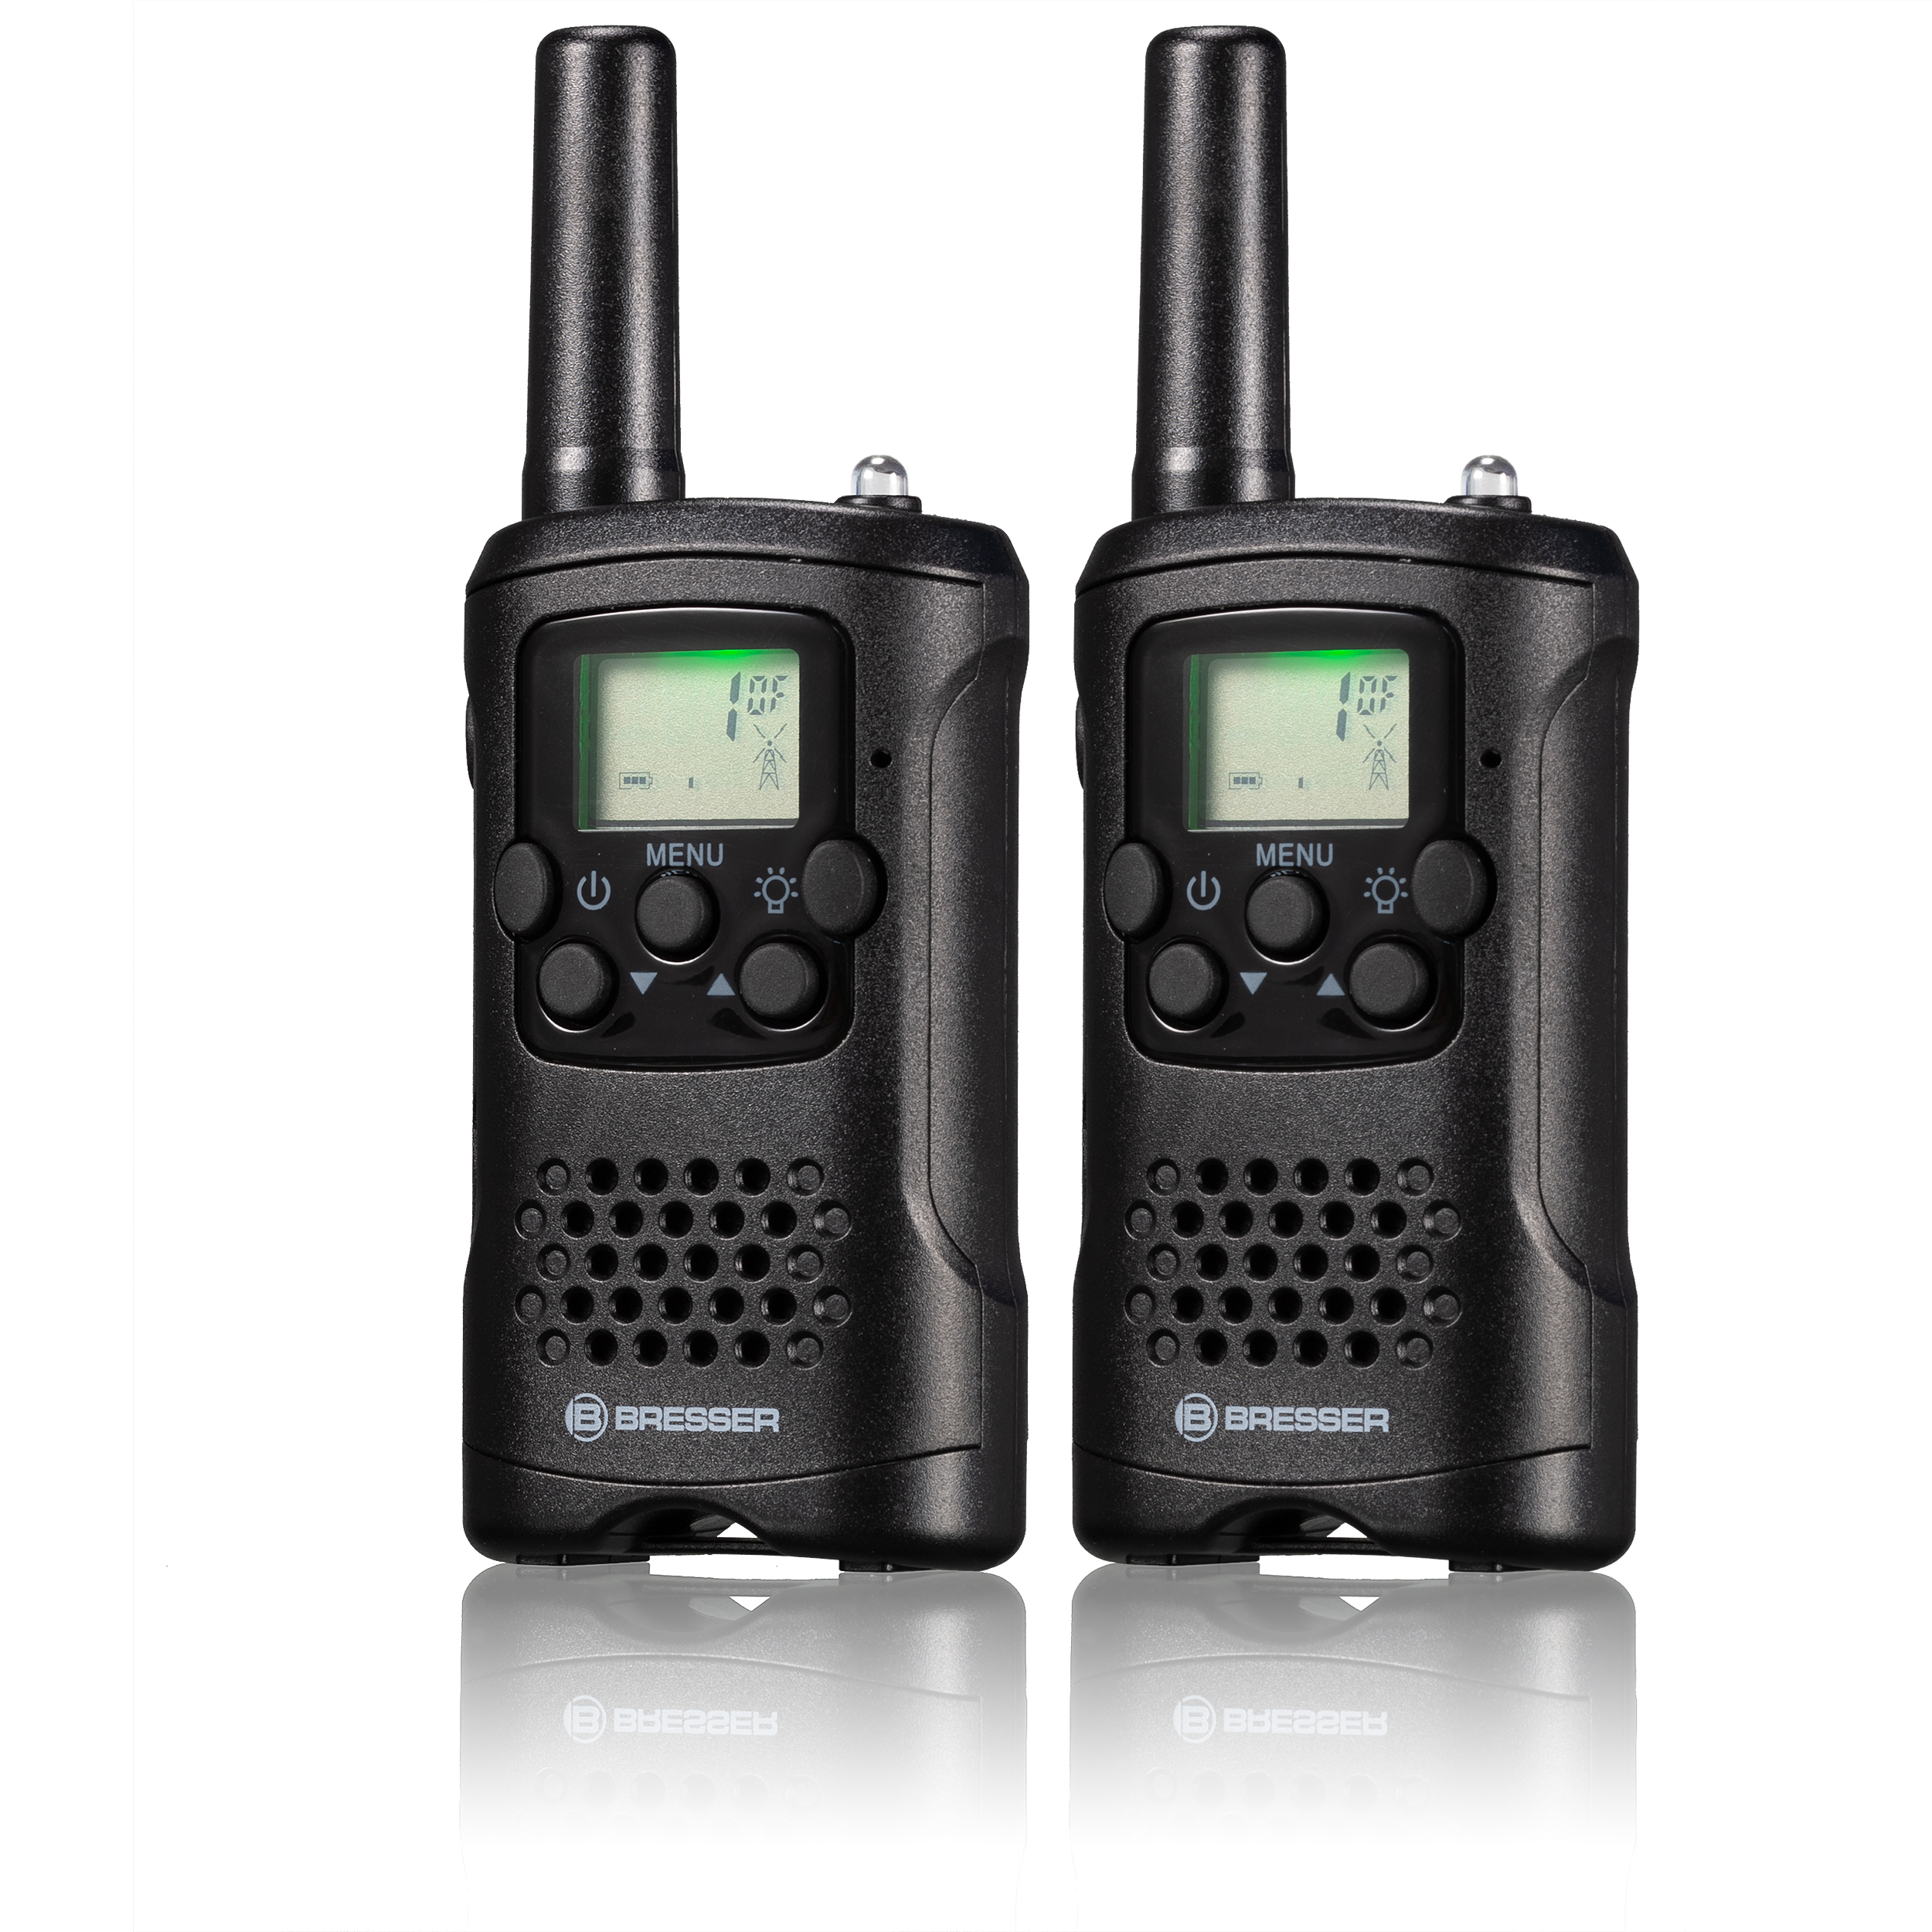 BRESSER FM Walkie Talkie 2piece Set with large range up to 6 km and free  hand mode